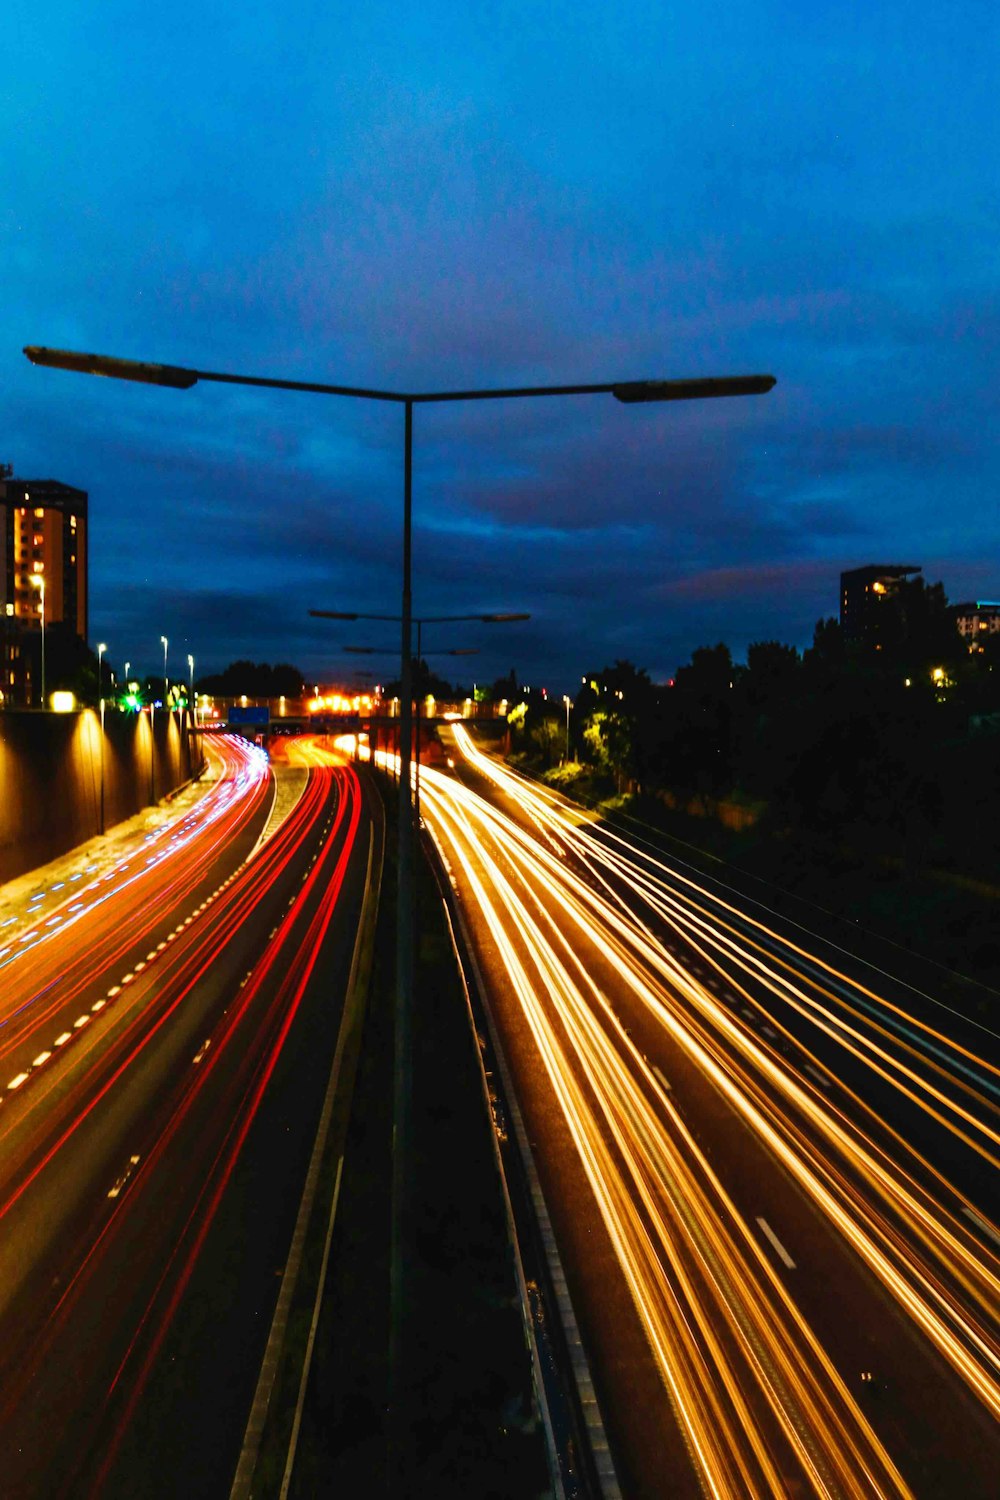 time lapse photography of passing cars on road during nighttime